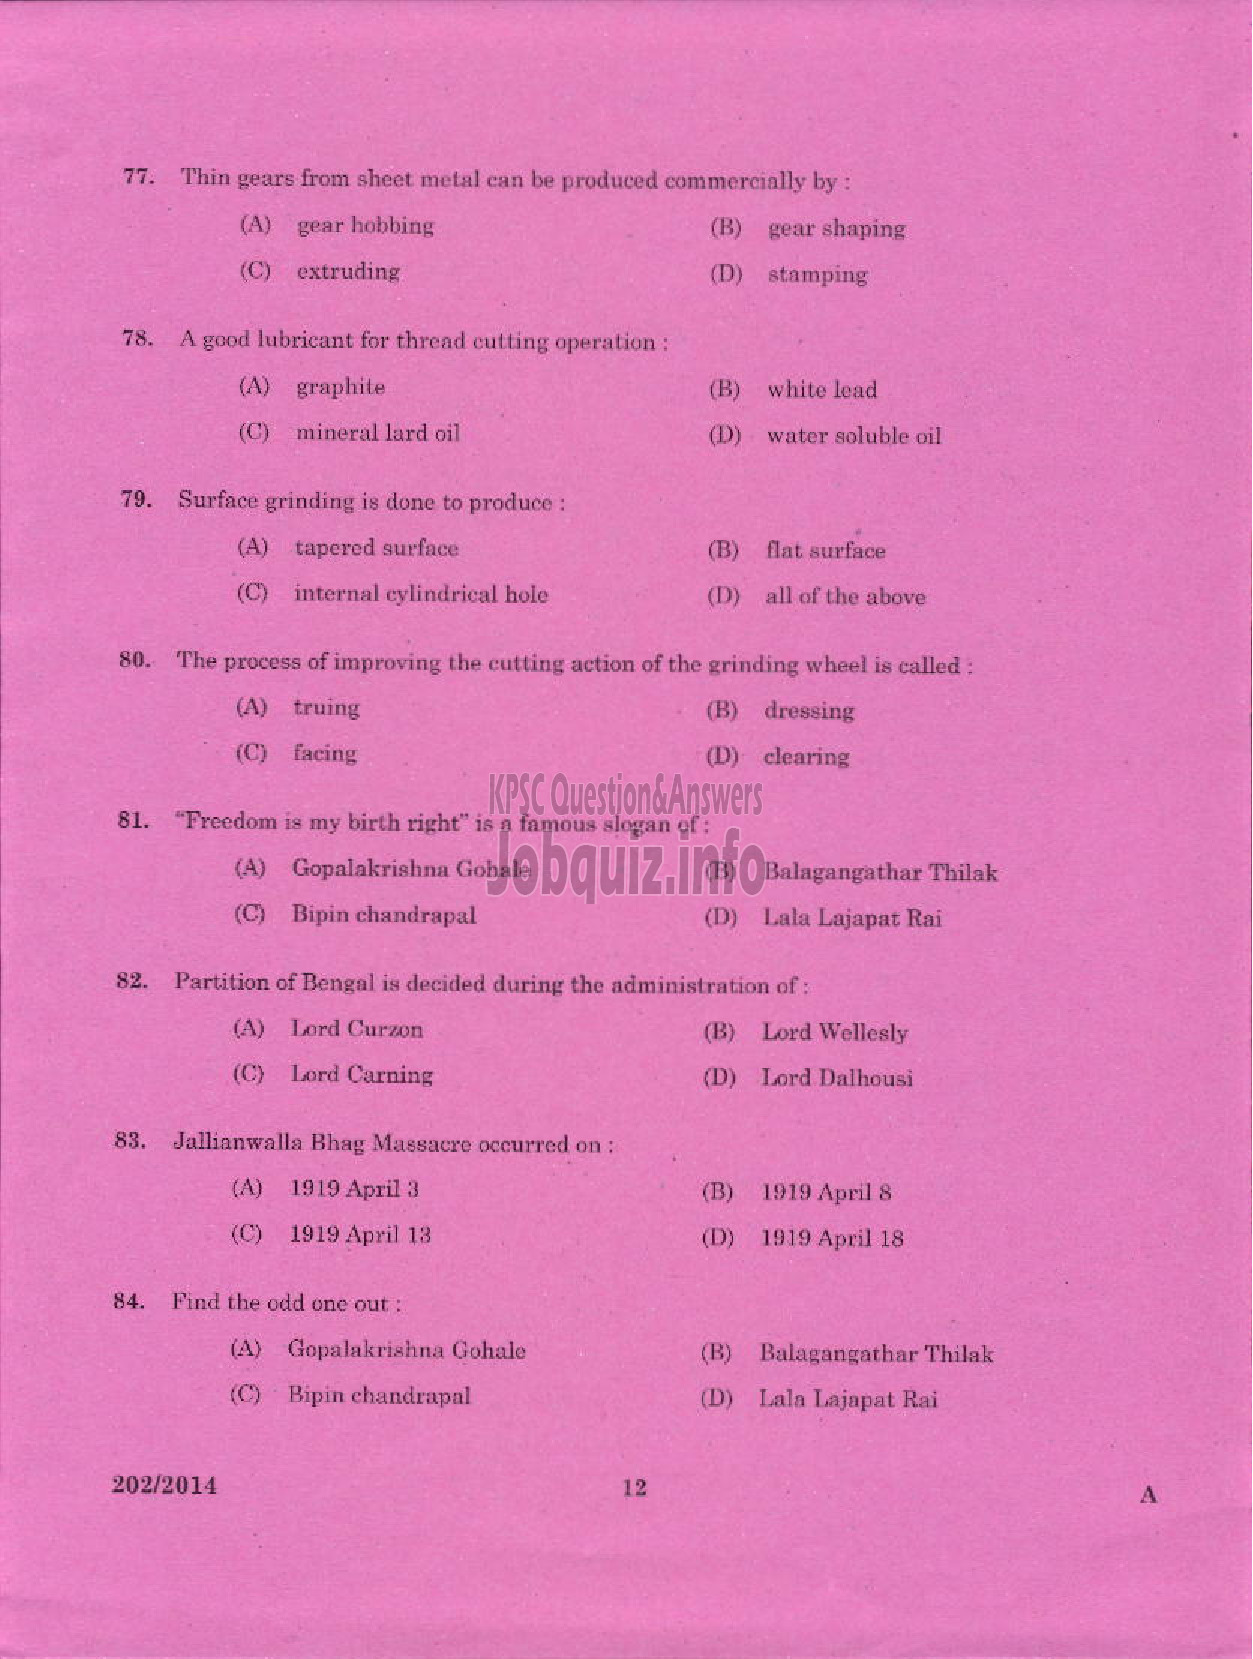 Kerala PSC Question Paper - TRADESMAN SHEET METAL ENGINEERING TECHNICAL EDUCATION TVM PTA IDK WYD AND KGD-10